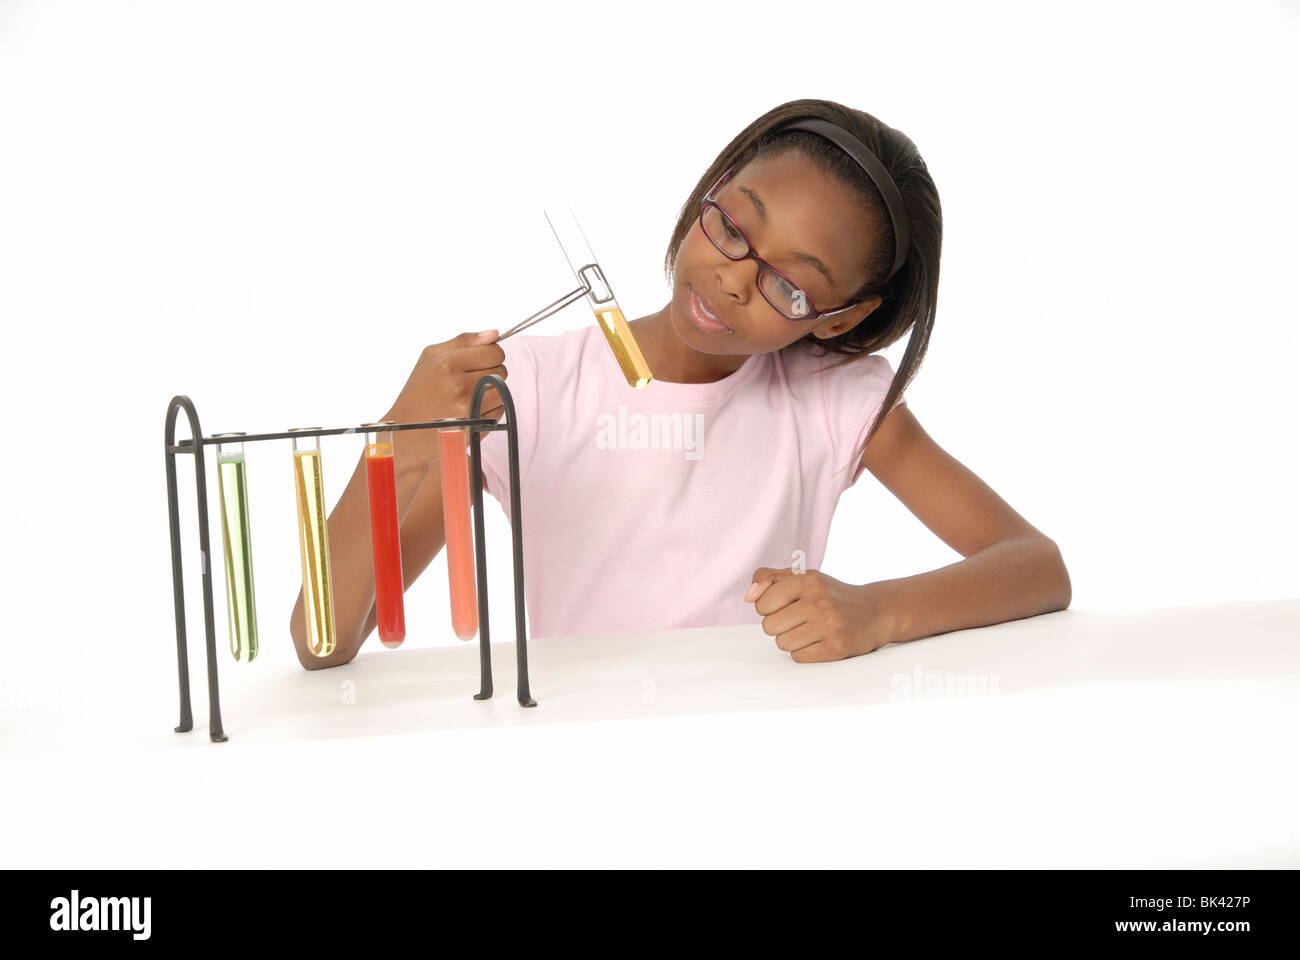 Ten year old girl, a student, doing a science experiment with beakers filled with colorful liquid. Stock Photo